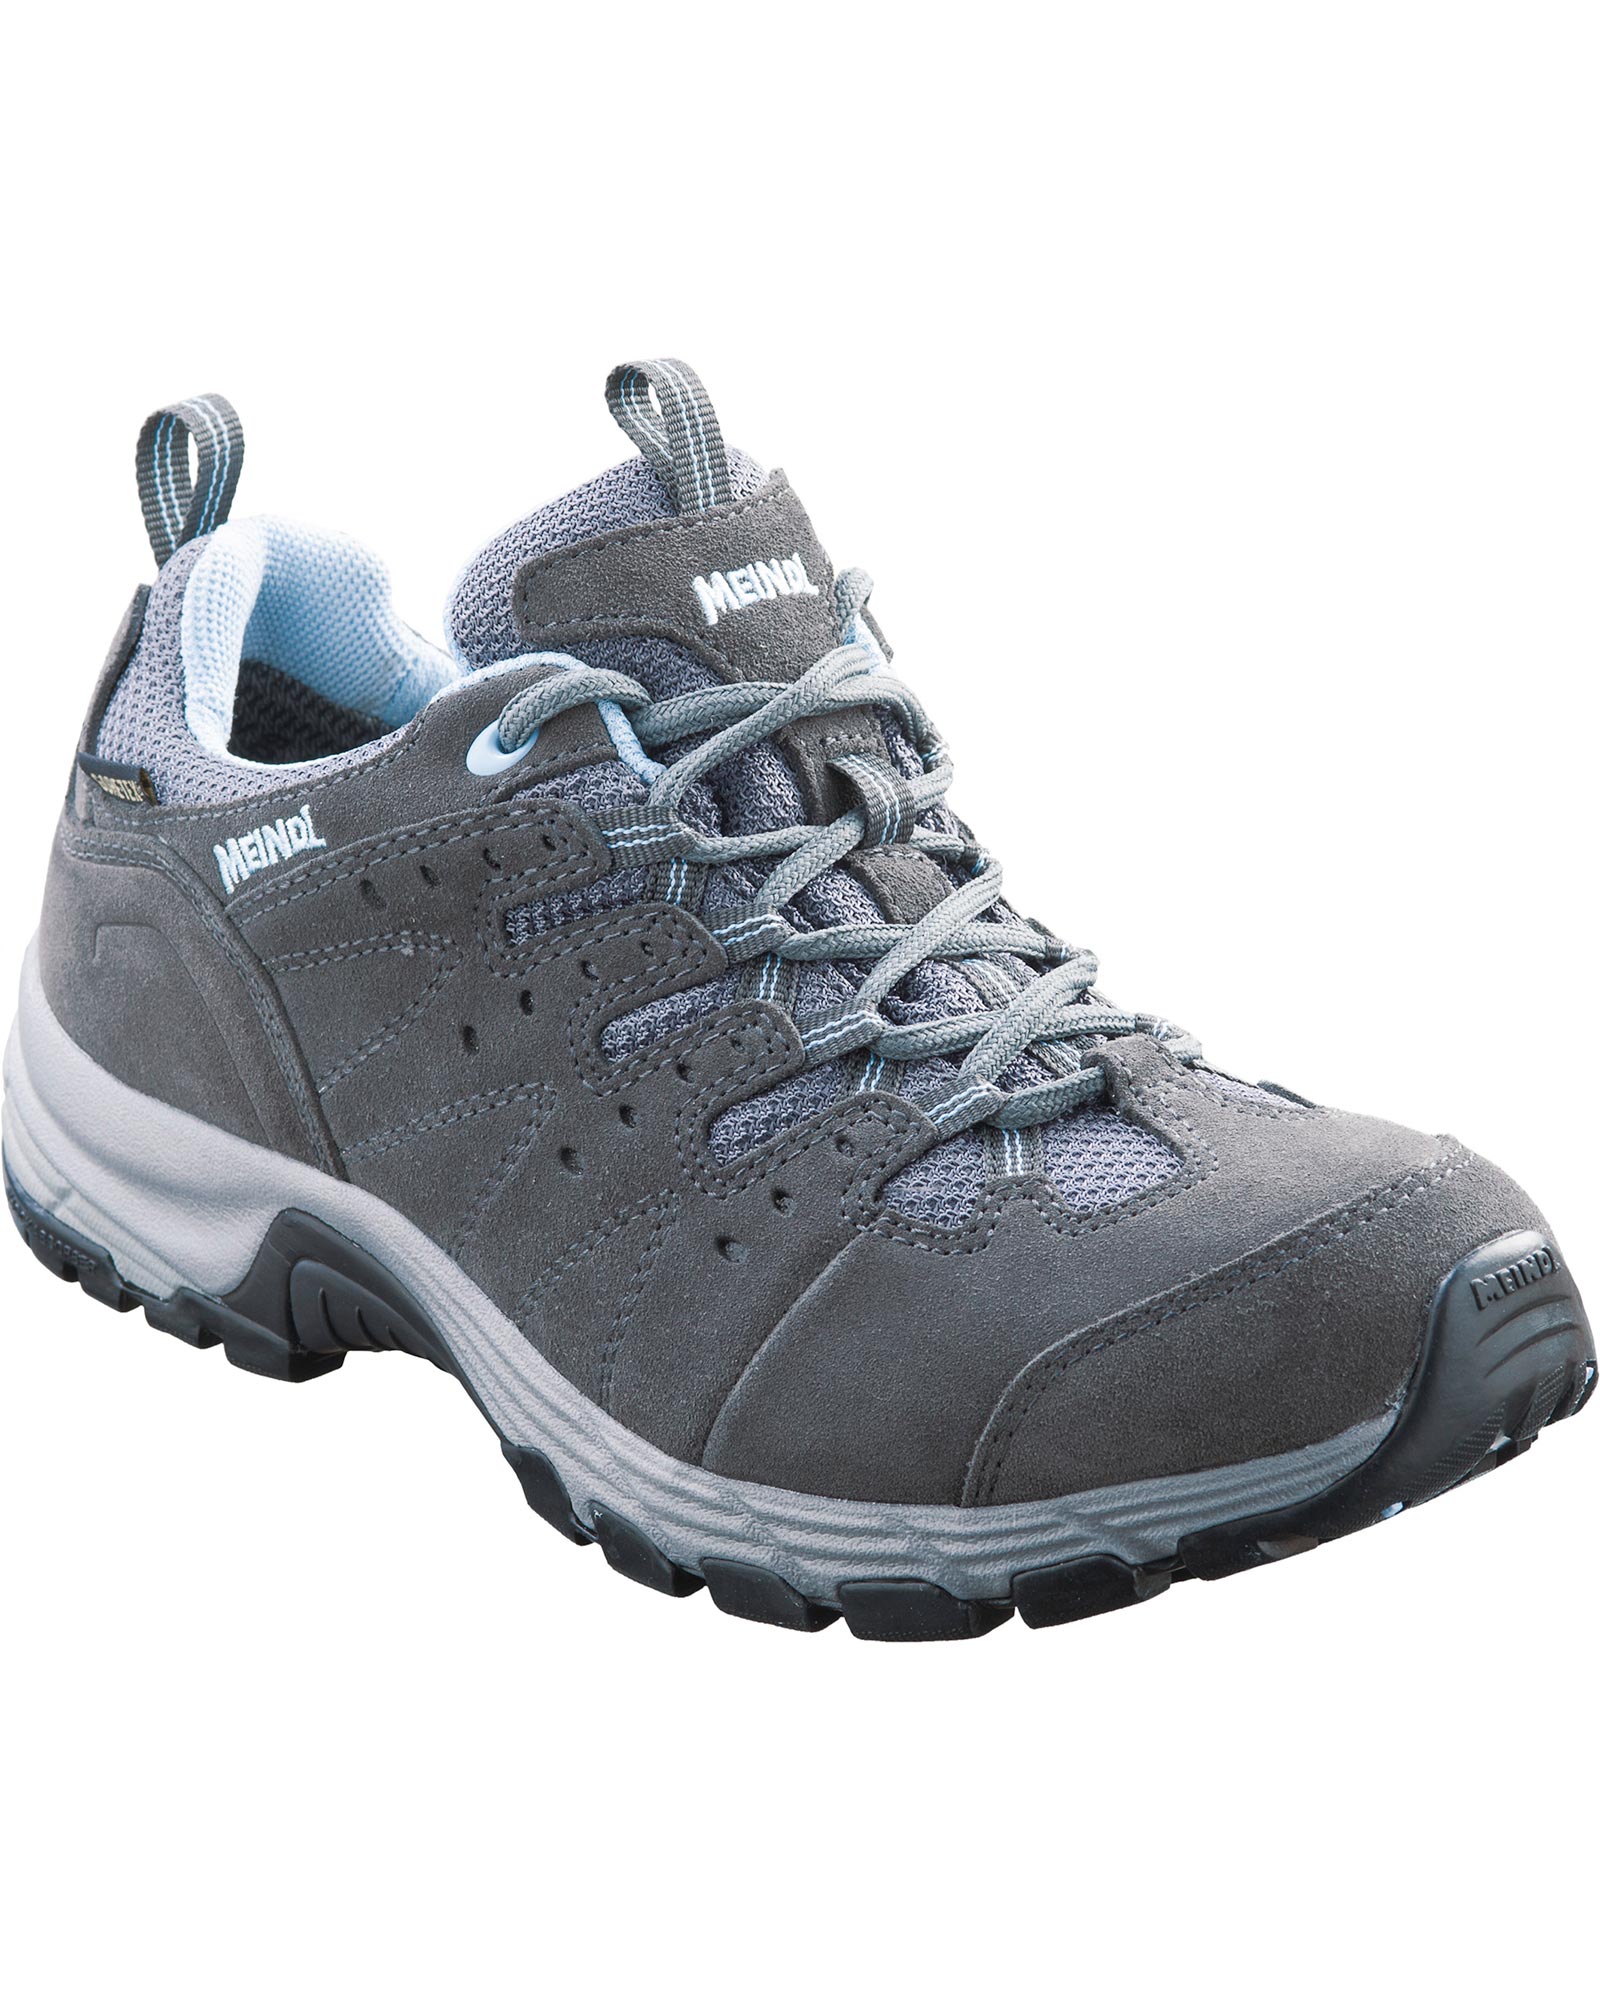 Meindl Rapide GORE TEX Women’s Shoes - Anthracite/Azure UK 8